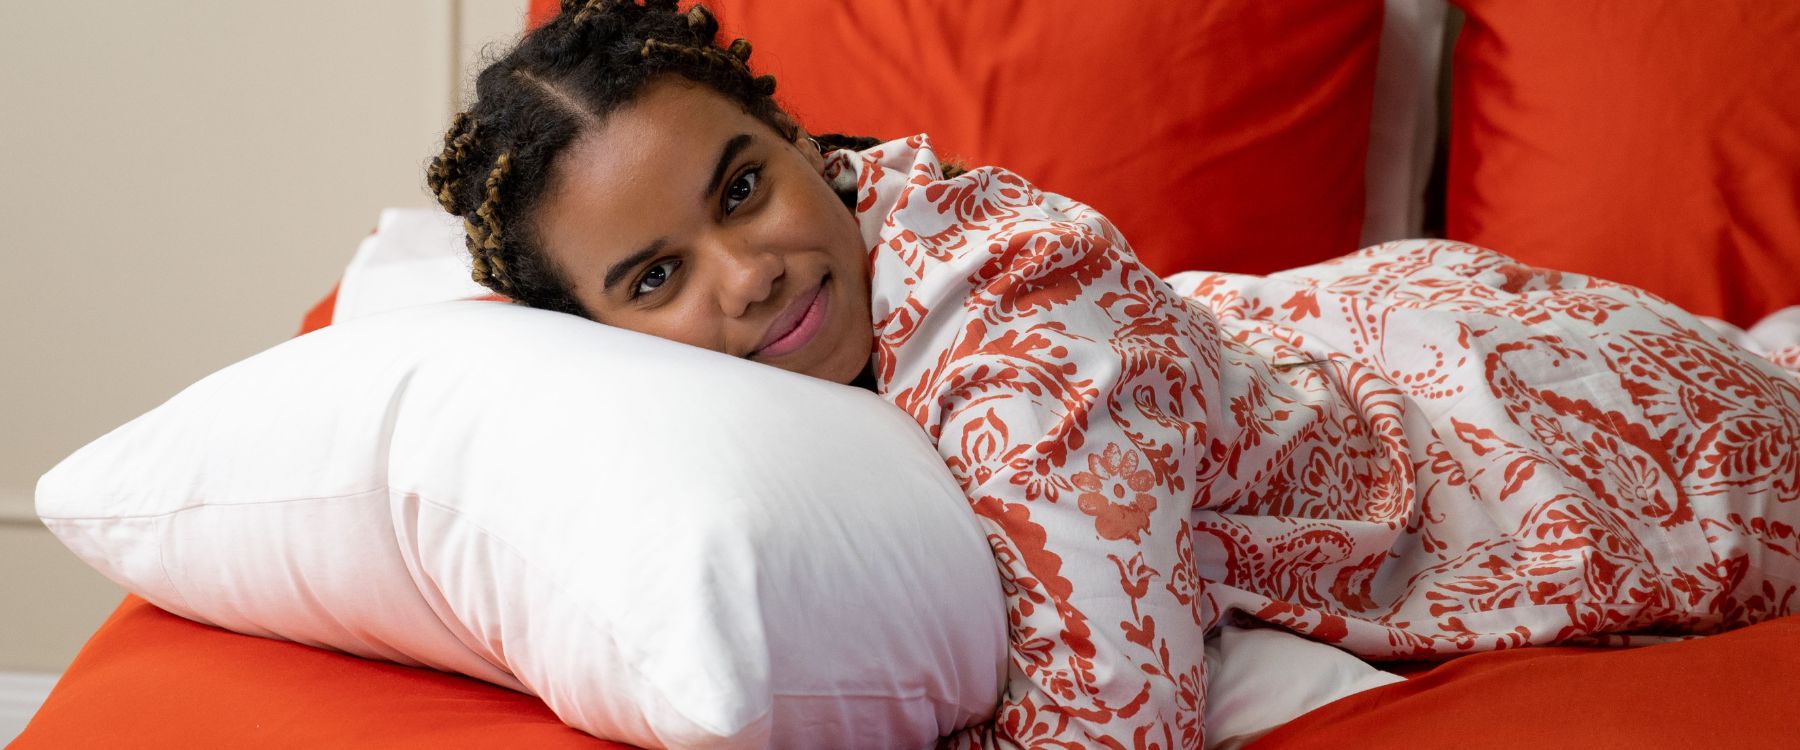 Should You Sleep in Pyjamas? 5 Reasons Why the Answer Is a